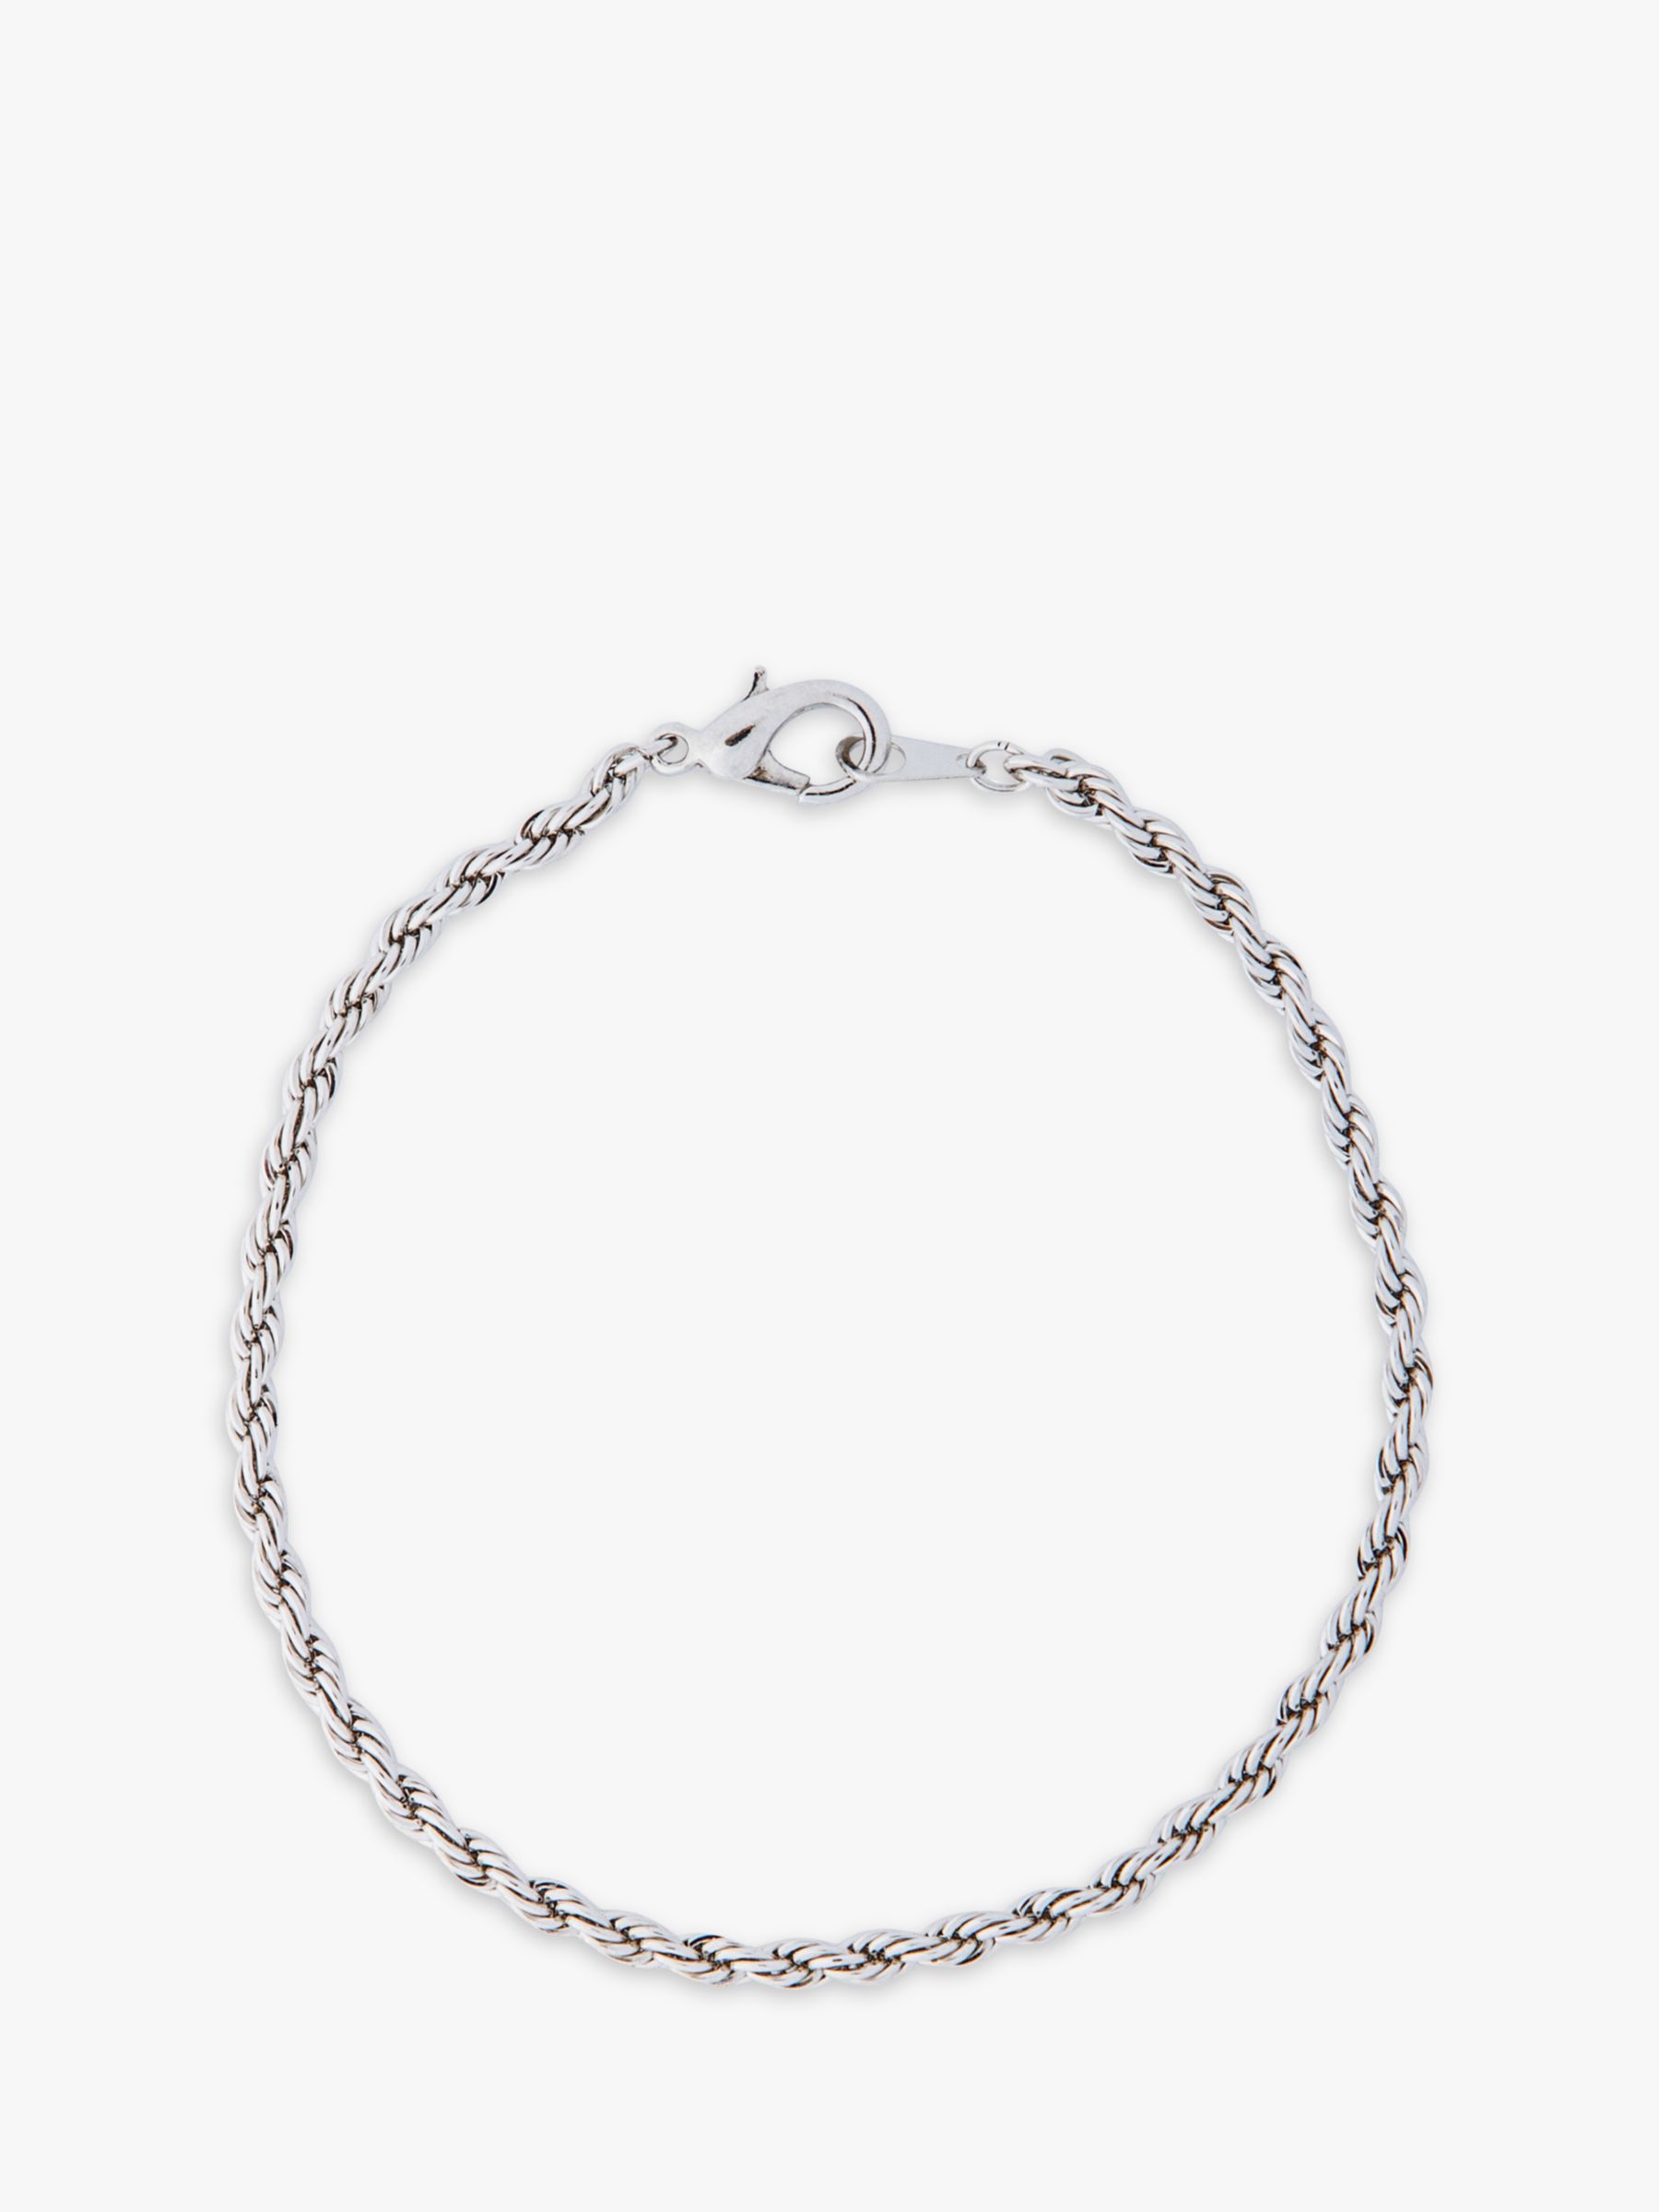 Eclectica Vintage Twisted Chain Bracelet, Silver at John Lewis & Partners